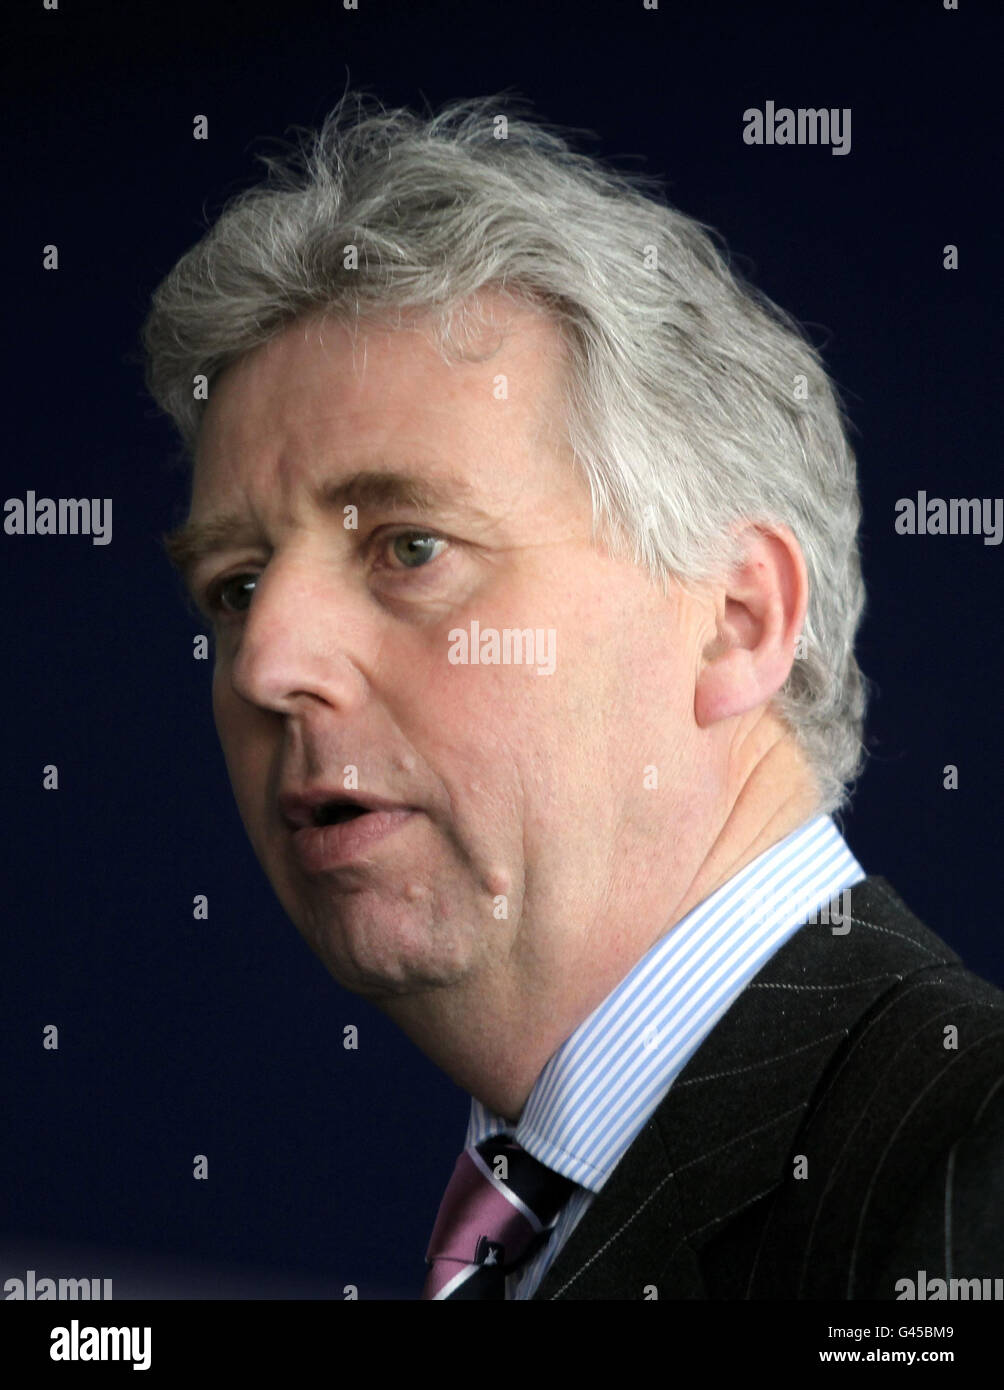 Manging director of Cheltenham Racecourse Edward Gillespie during the Countdown to Cheltenham Festival press conference at Cheltenham Racecourse, Wednesday March 2 2011. PA Photo : David Davies. Stock Photo